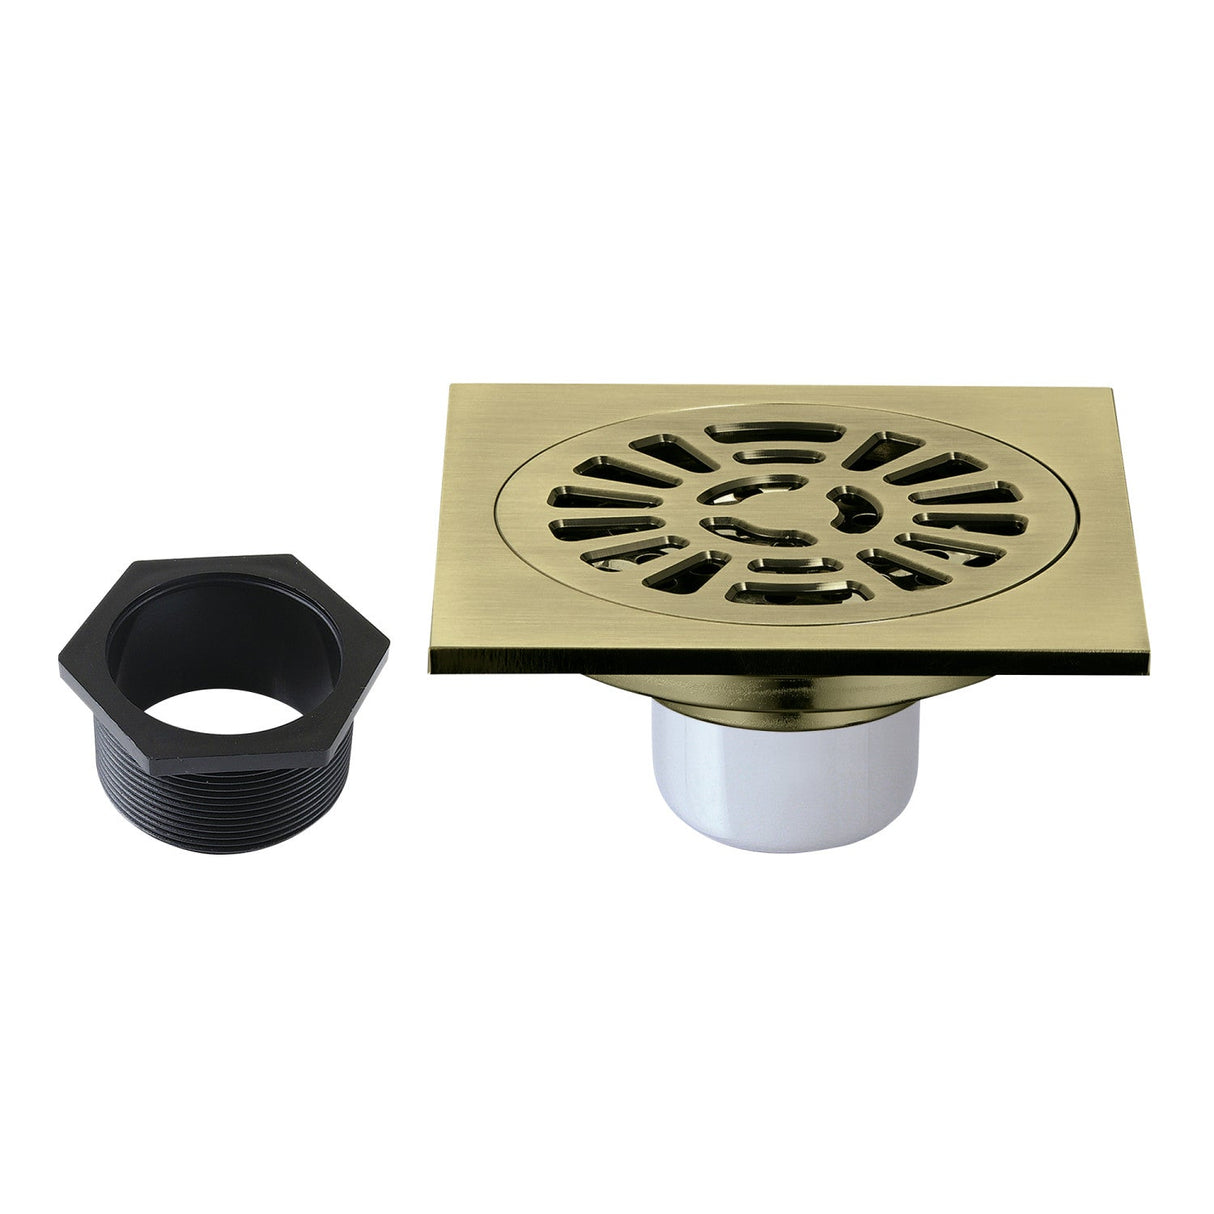 Watercourse BSF4267AB 4-Inch Square Brass Shower Drain, Antique Brass